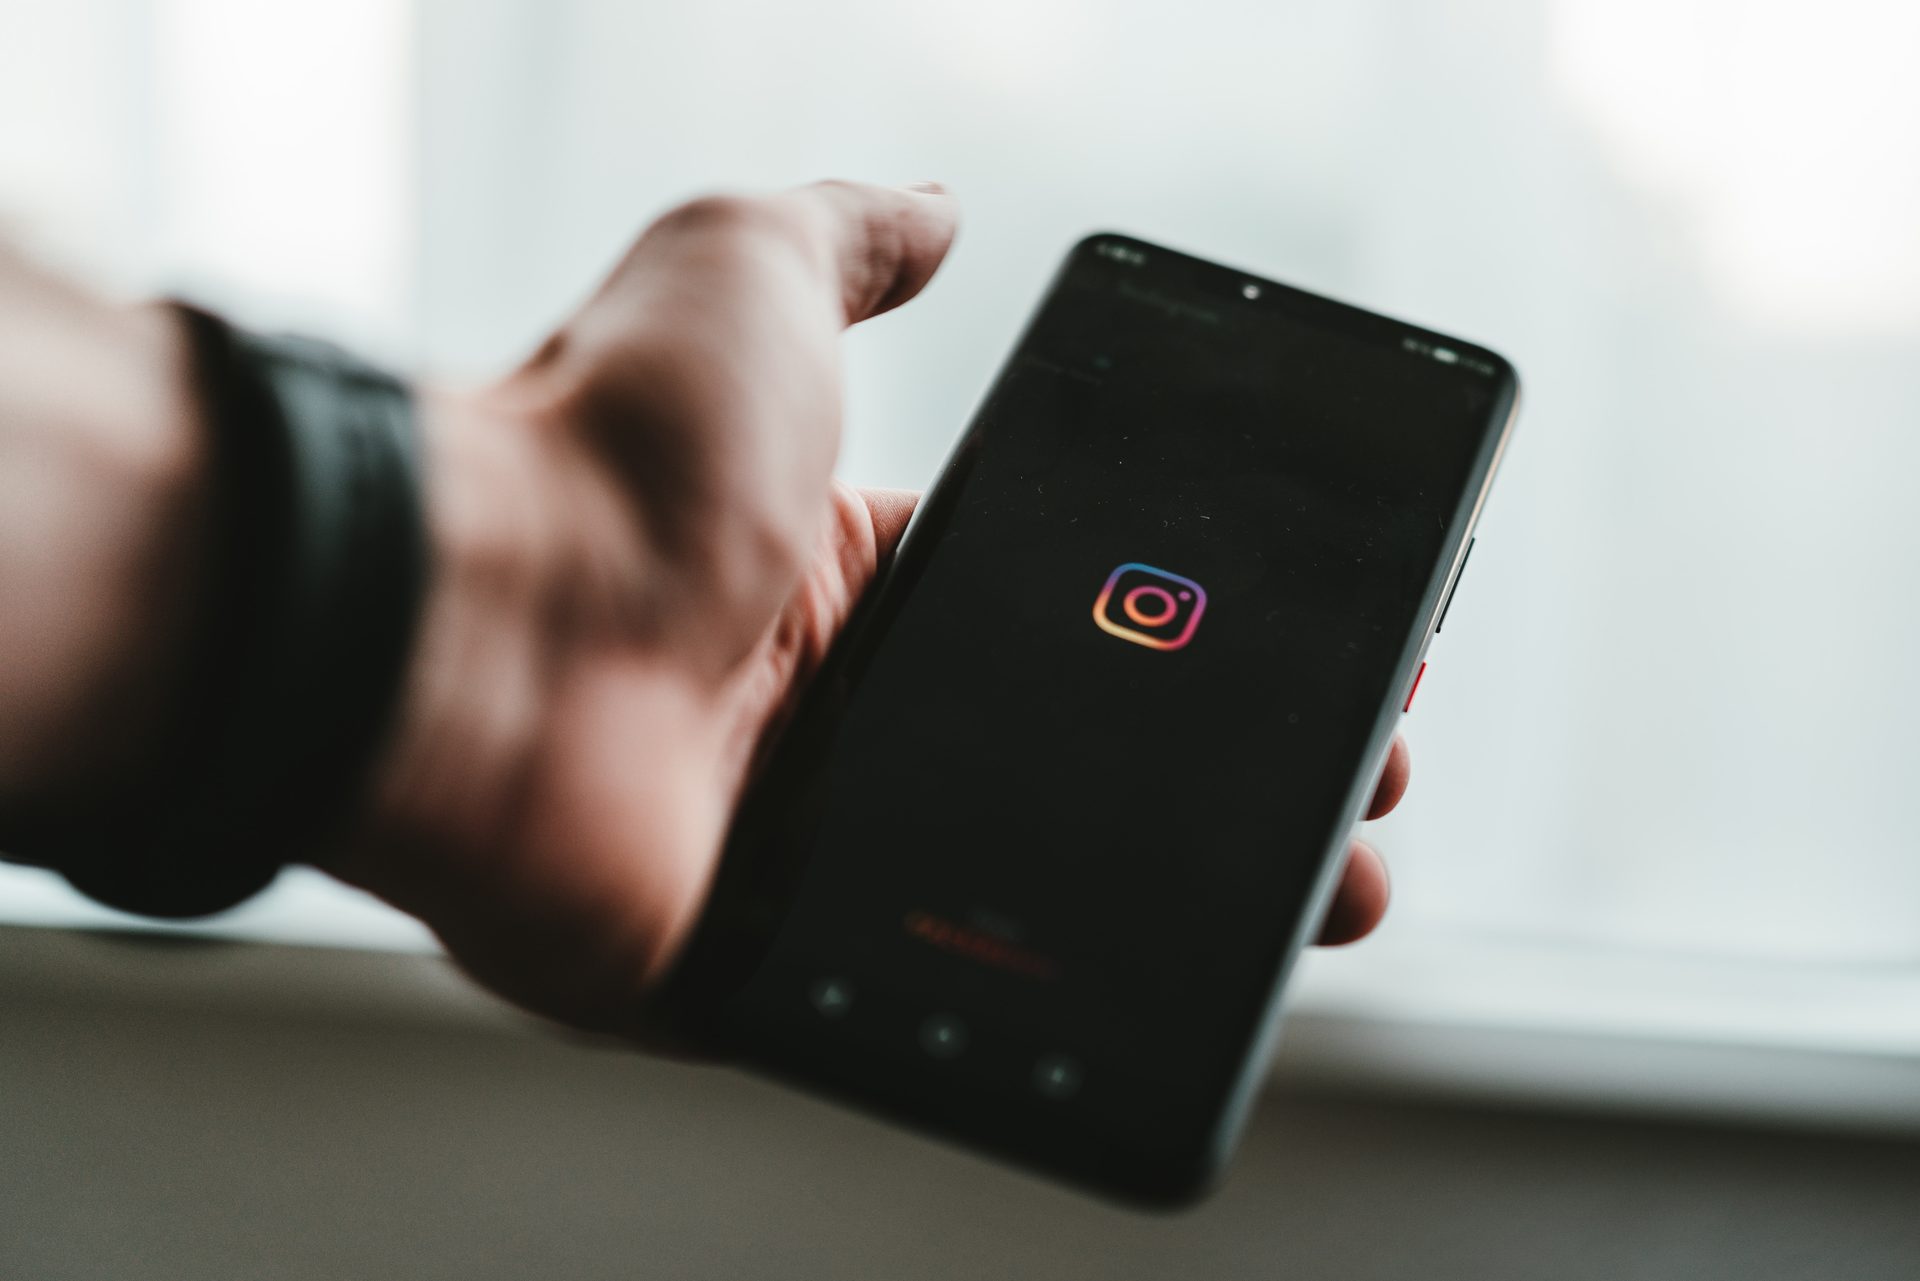 Is Instagram not working? Learn how to fix Instagram not working issues and common Instagram error. Plus, there are alternatives to try right now!